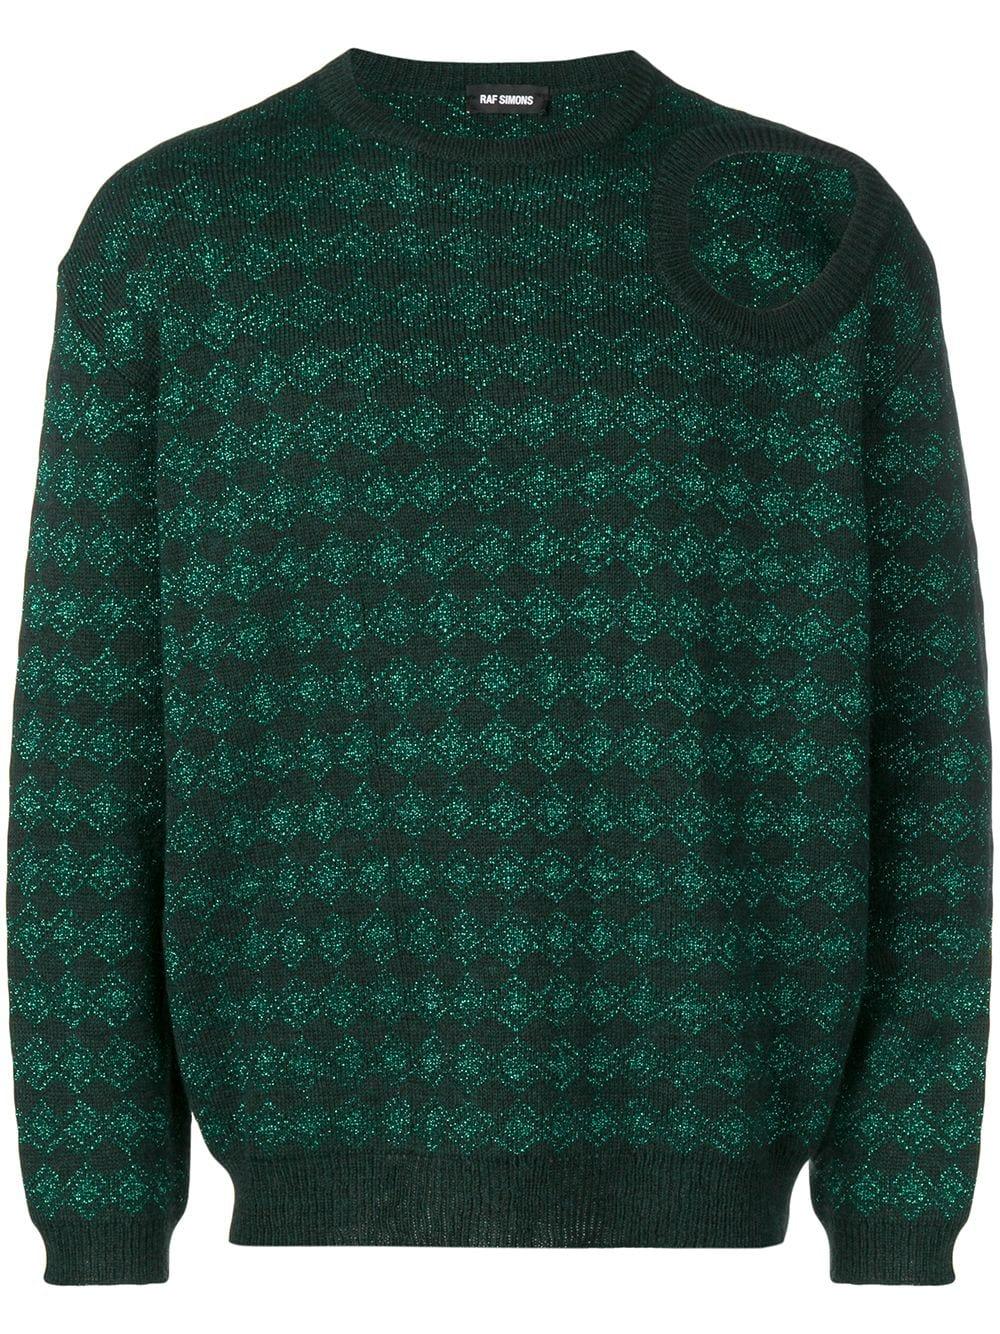 Raf Simons Synthetic Cut-out Detail Jumper in Green for Men - Lyst